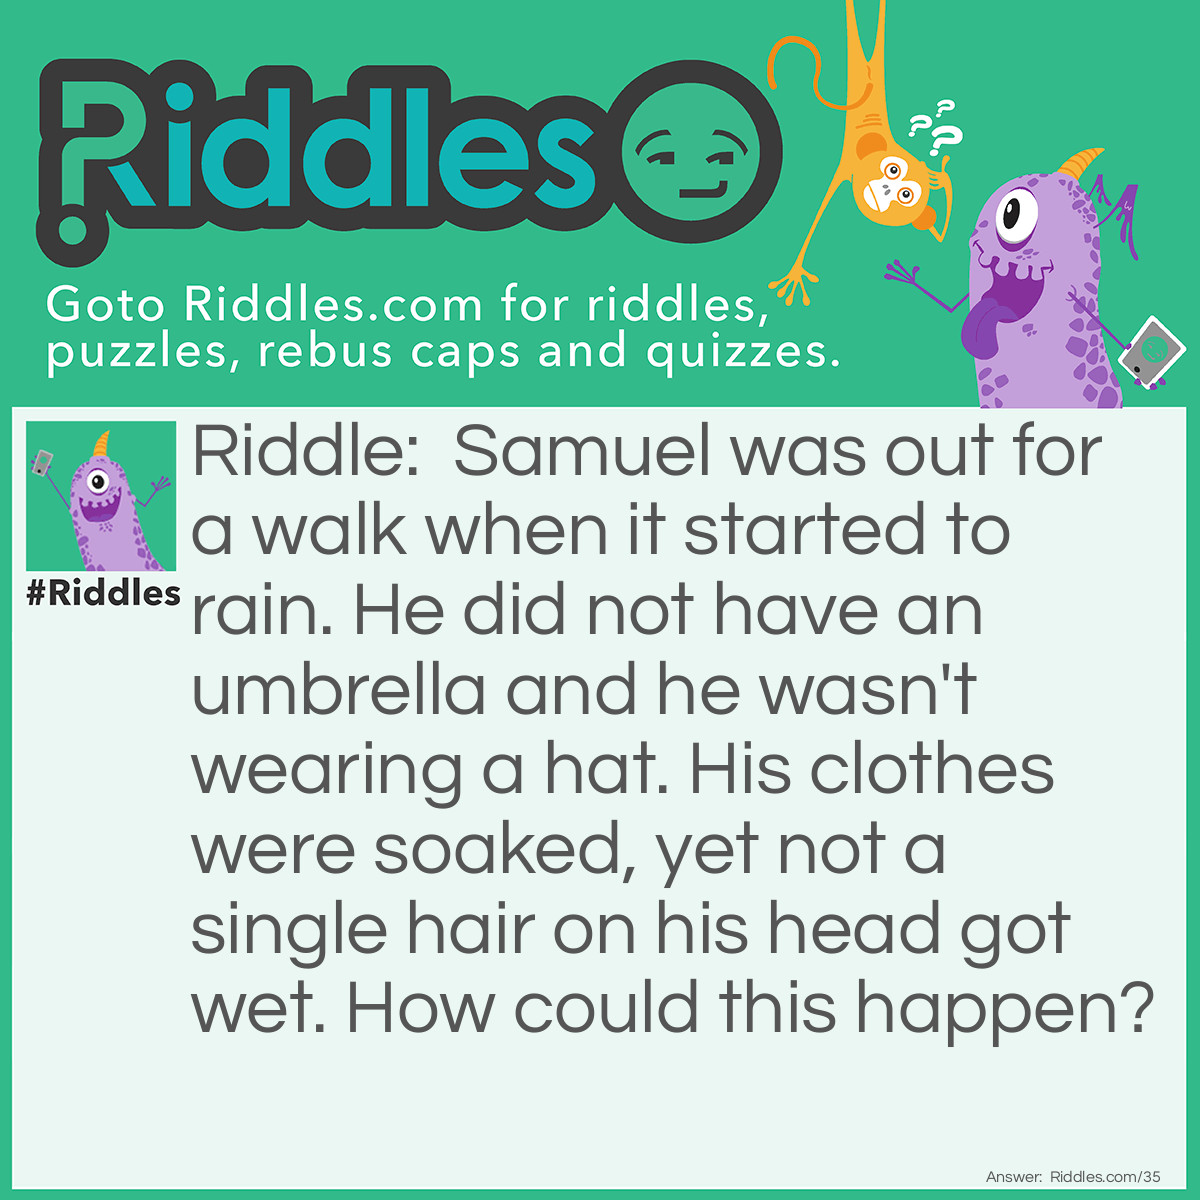 Riddle: Samuel was out for a walk when it started to rain. He did not have an umbrella and he wasn't wearing a hat. His clothes were soaked, yet not a single hair on his head got wet. How could this happen? Answer: This man is bald!